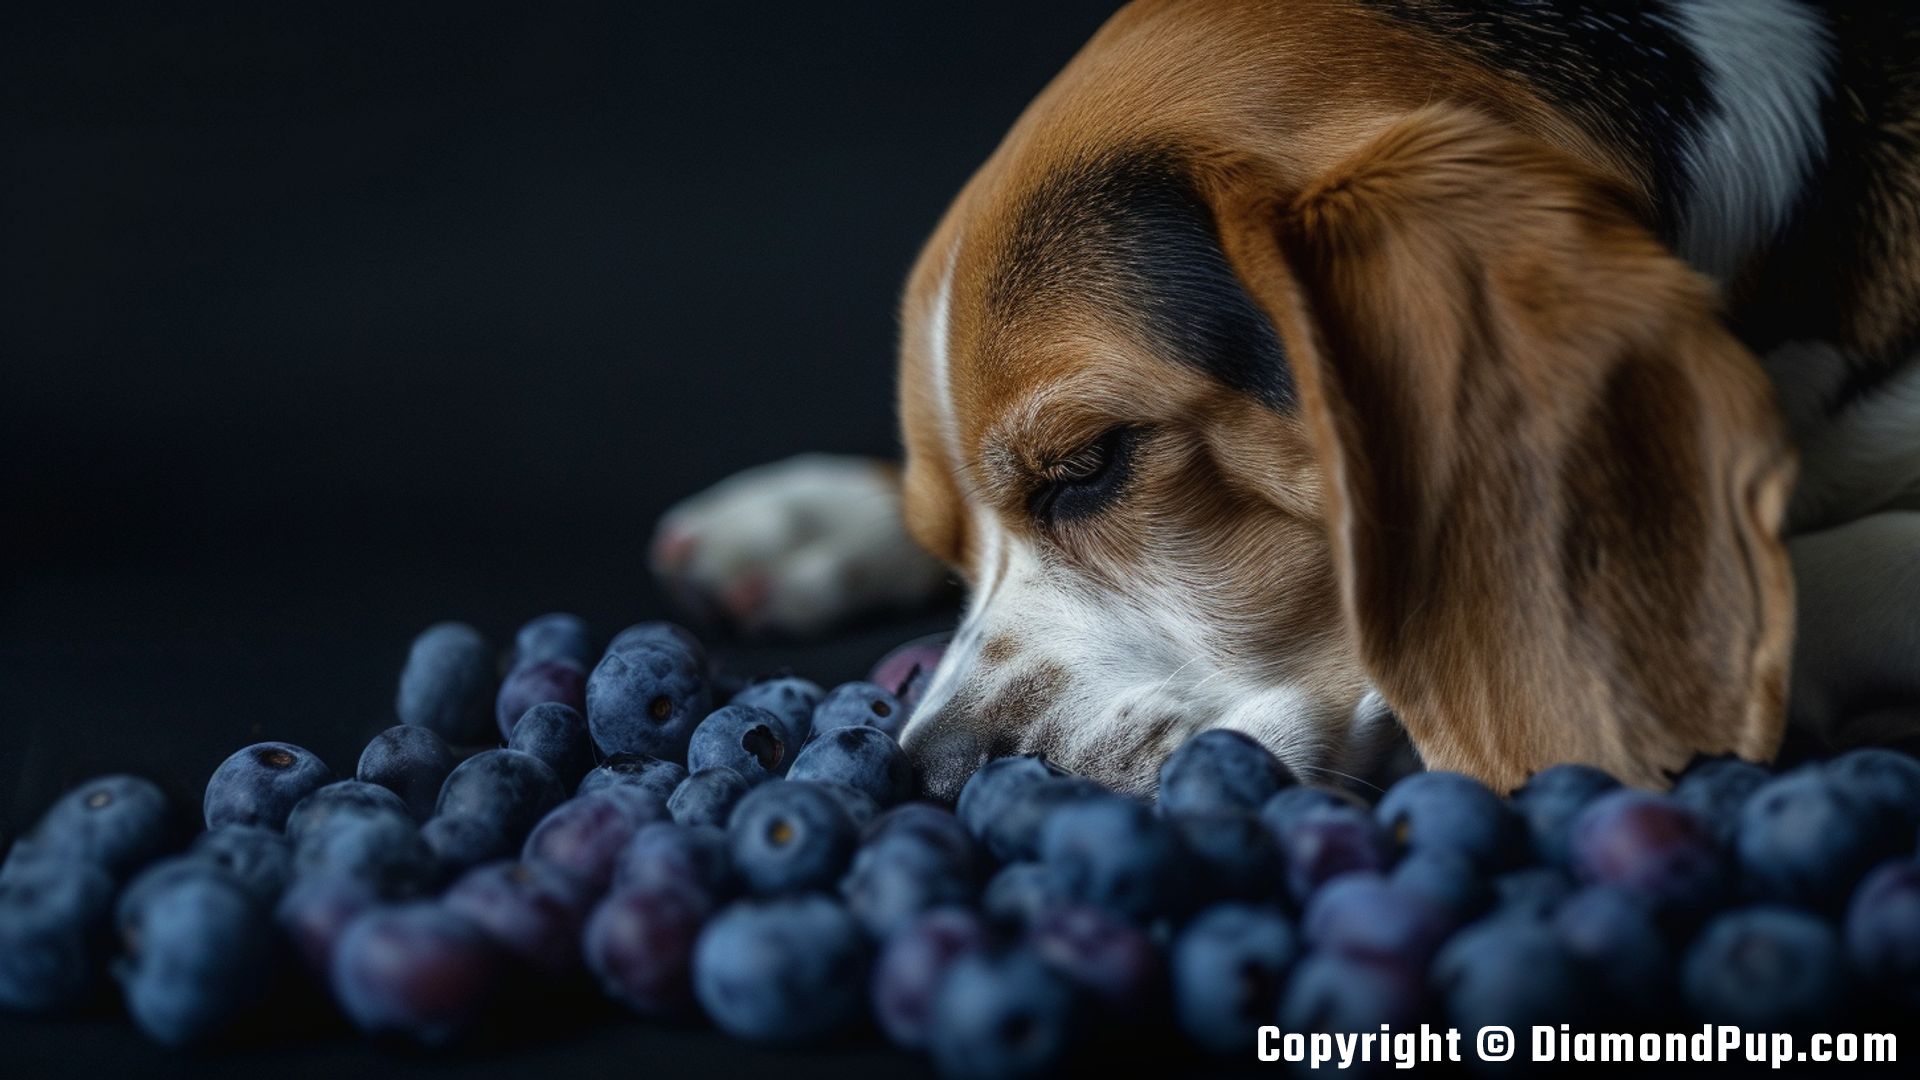 Image of Beagle Snacking on Blueberries